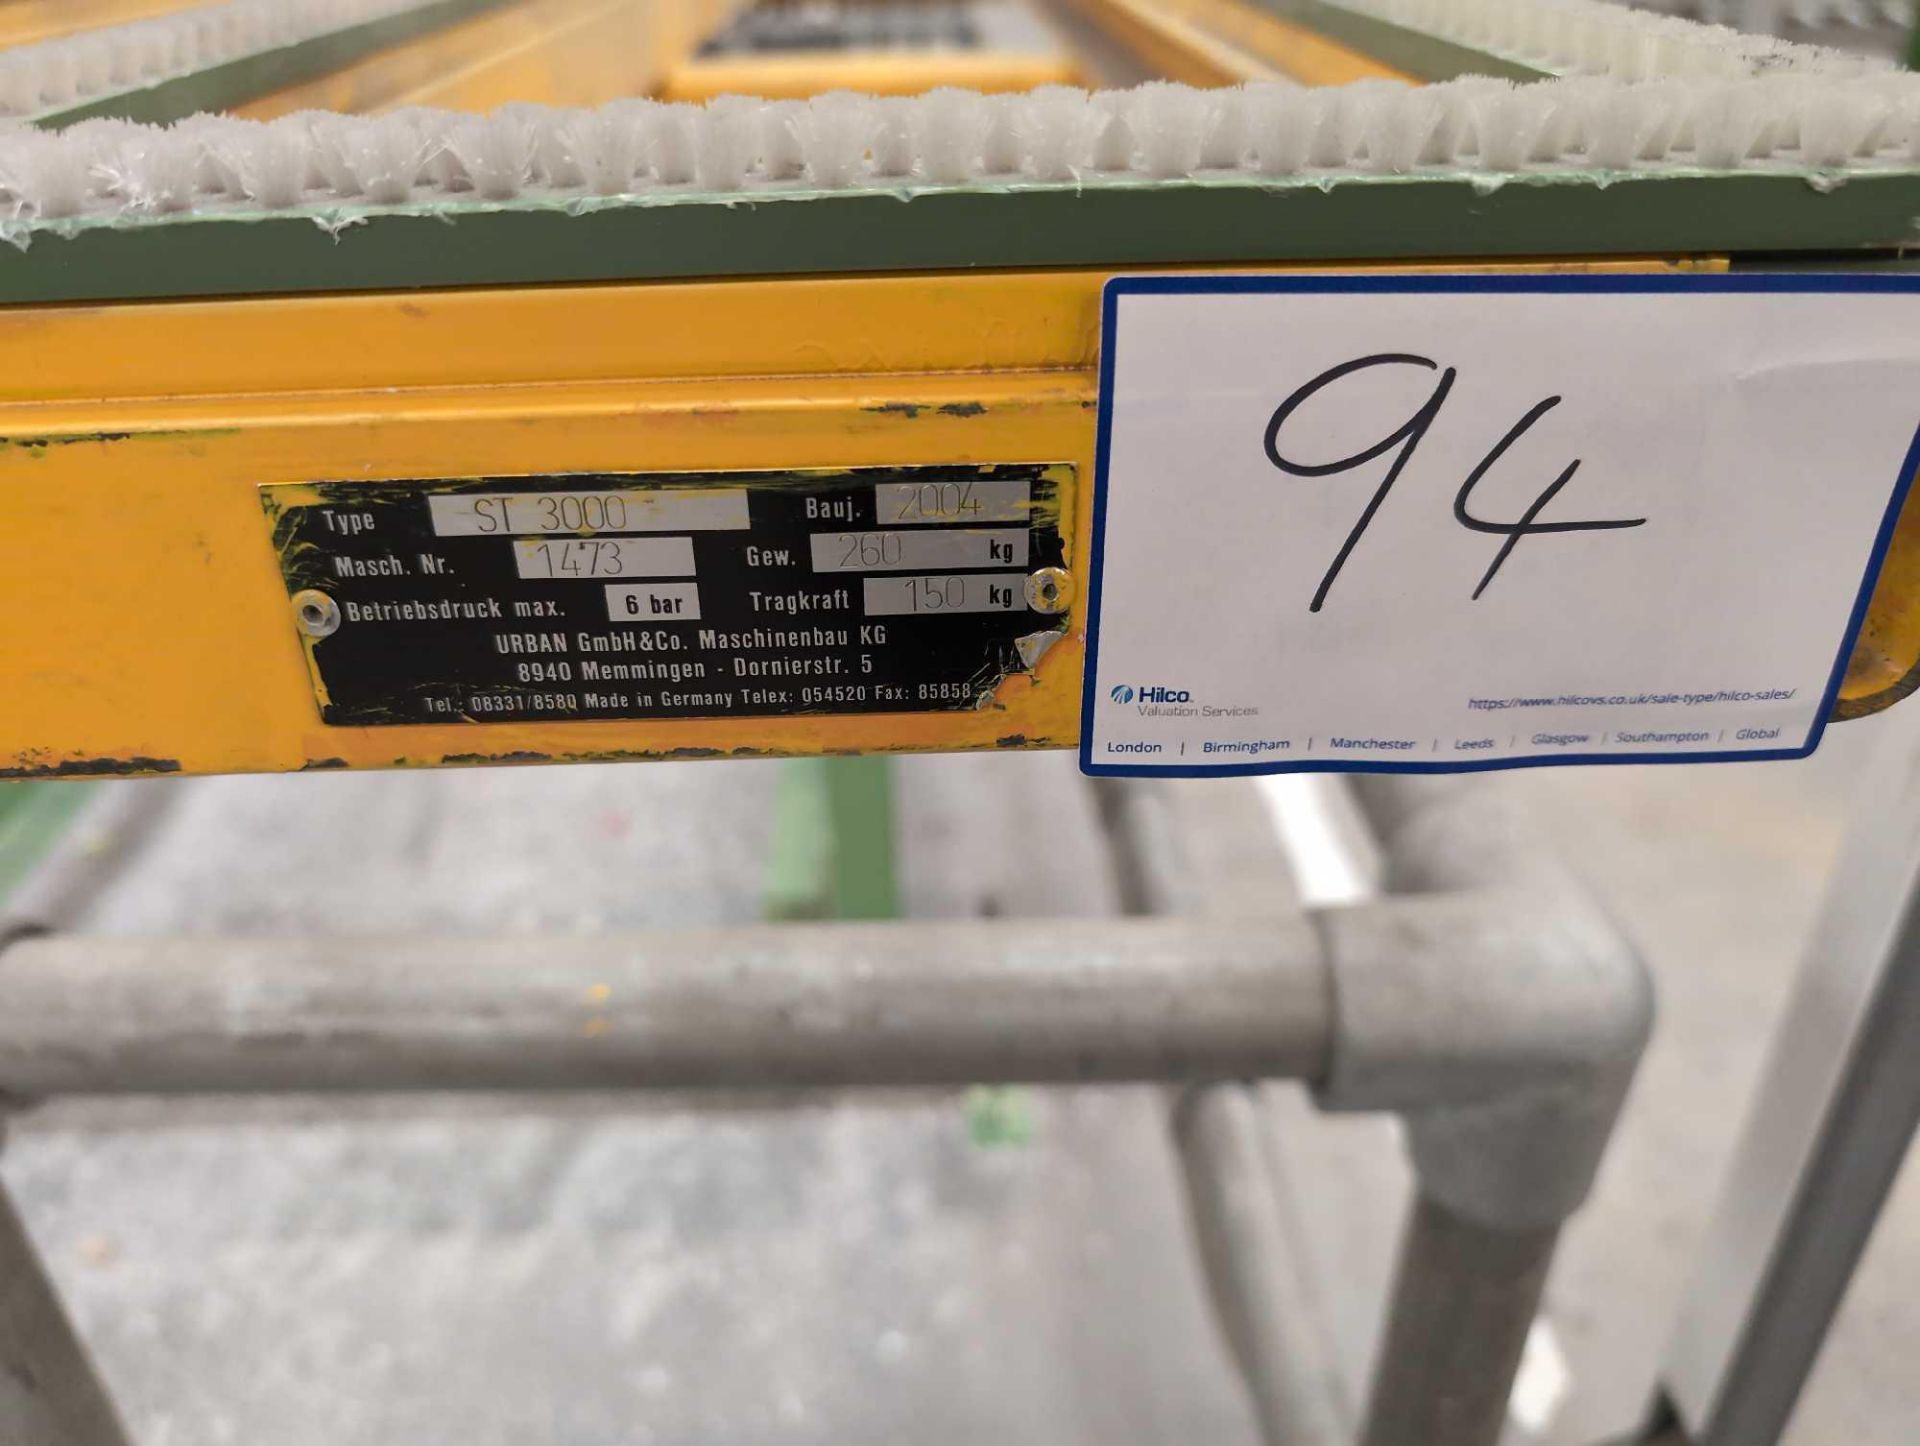 1: Urban, ST3000, Glazing Table, Serial Number: 1473, Year of Manufacture: 2004 - Image 2 of 3